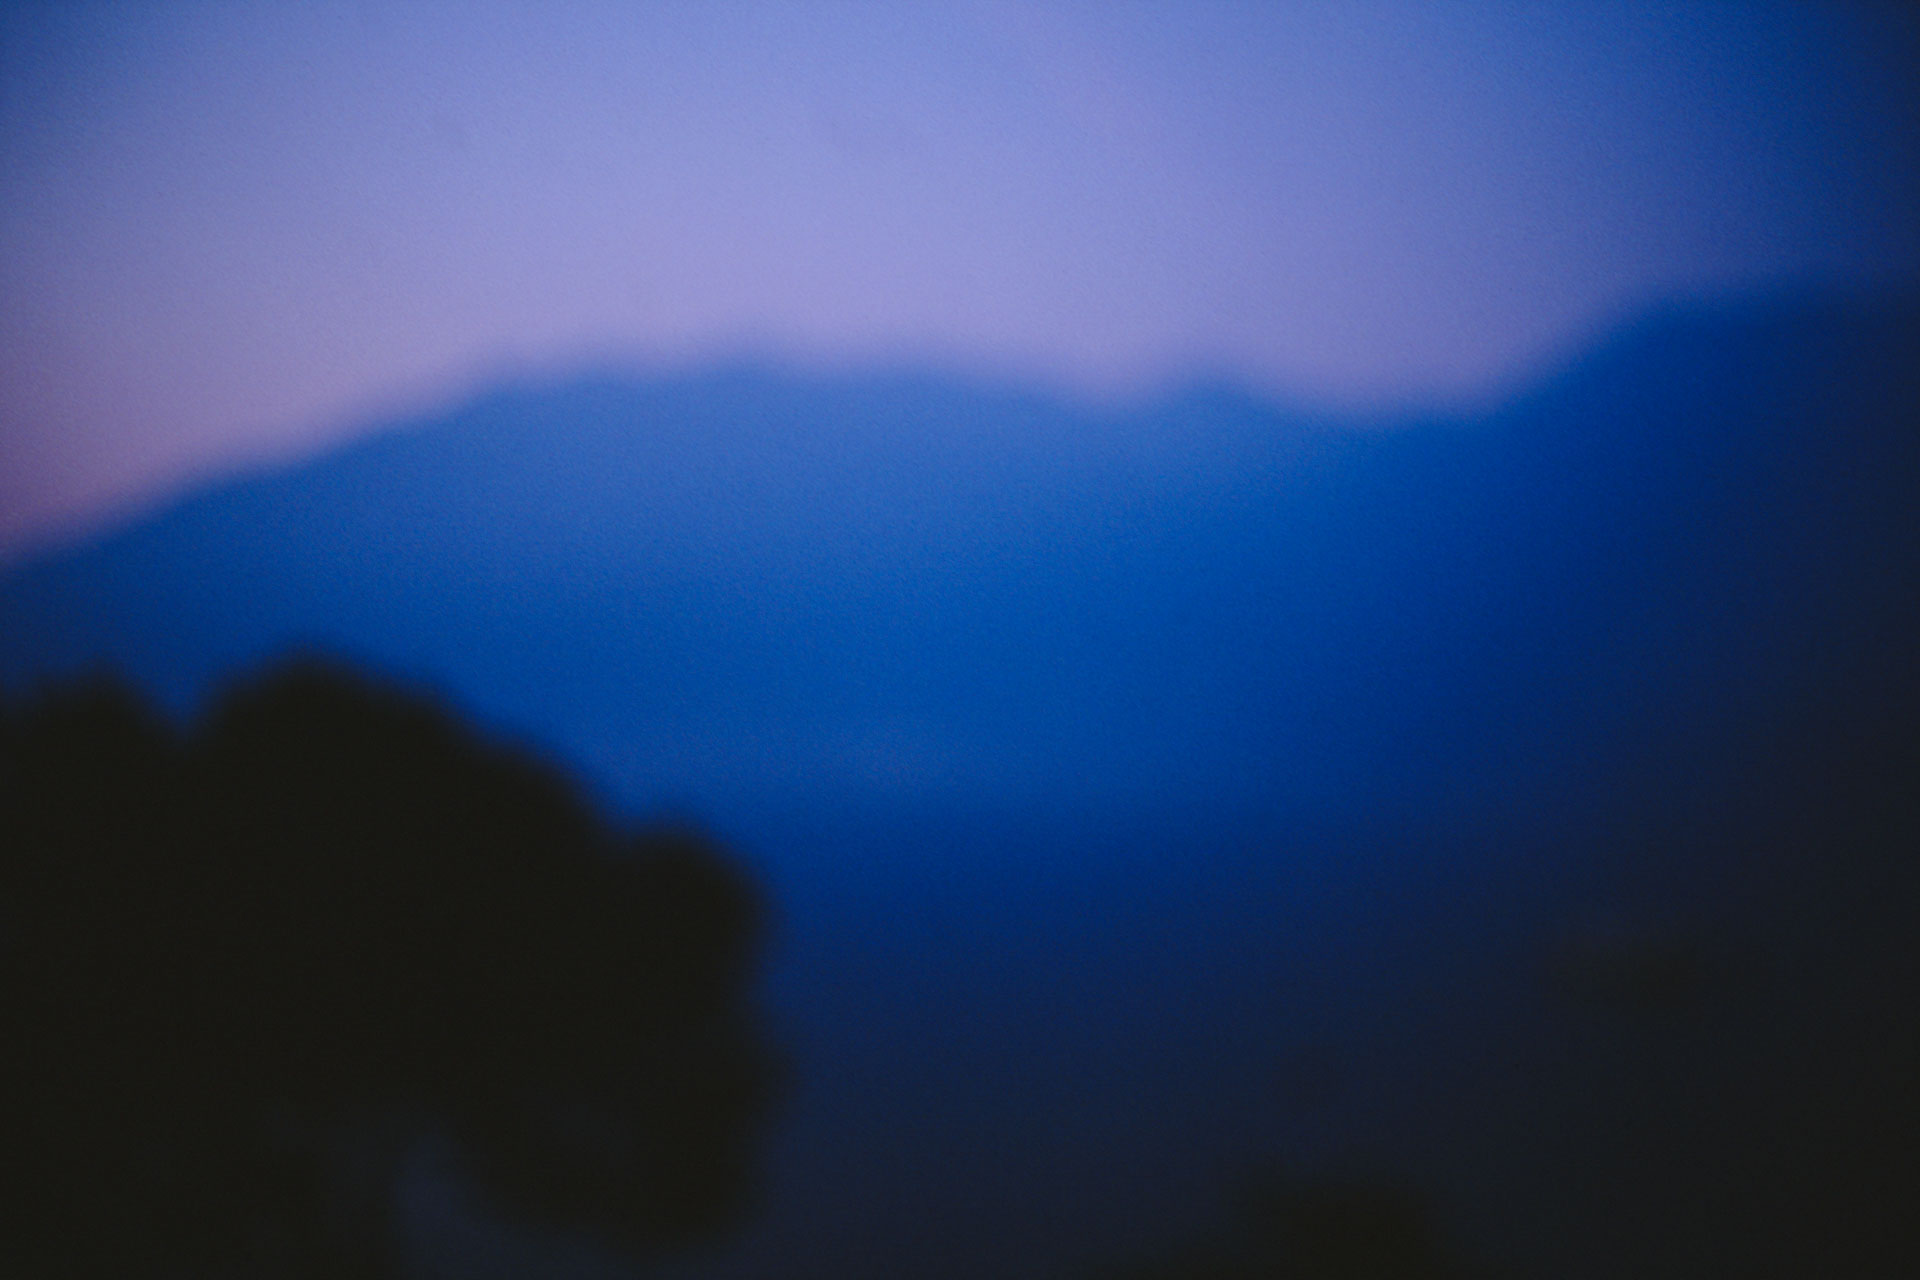 Blue Hills, Italy, n.d. Courtesy of the artist and Marian Goodman Gallery. © Nan Goldin